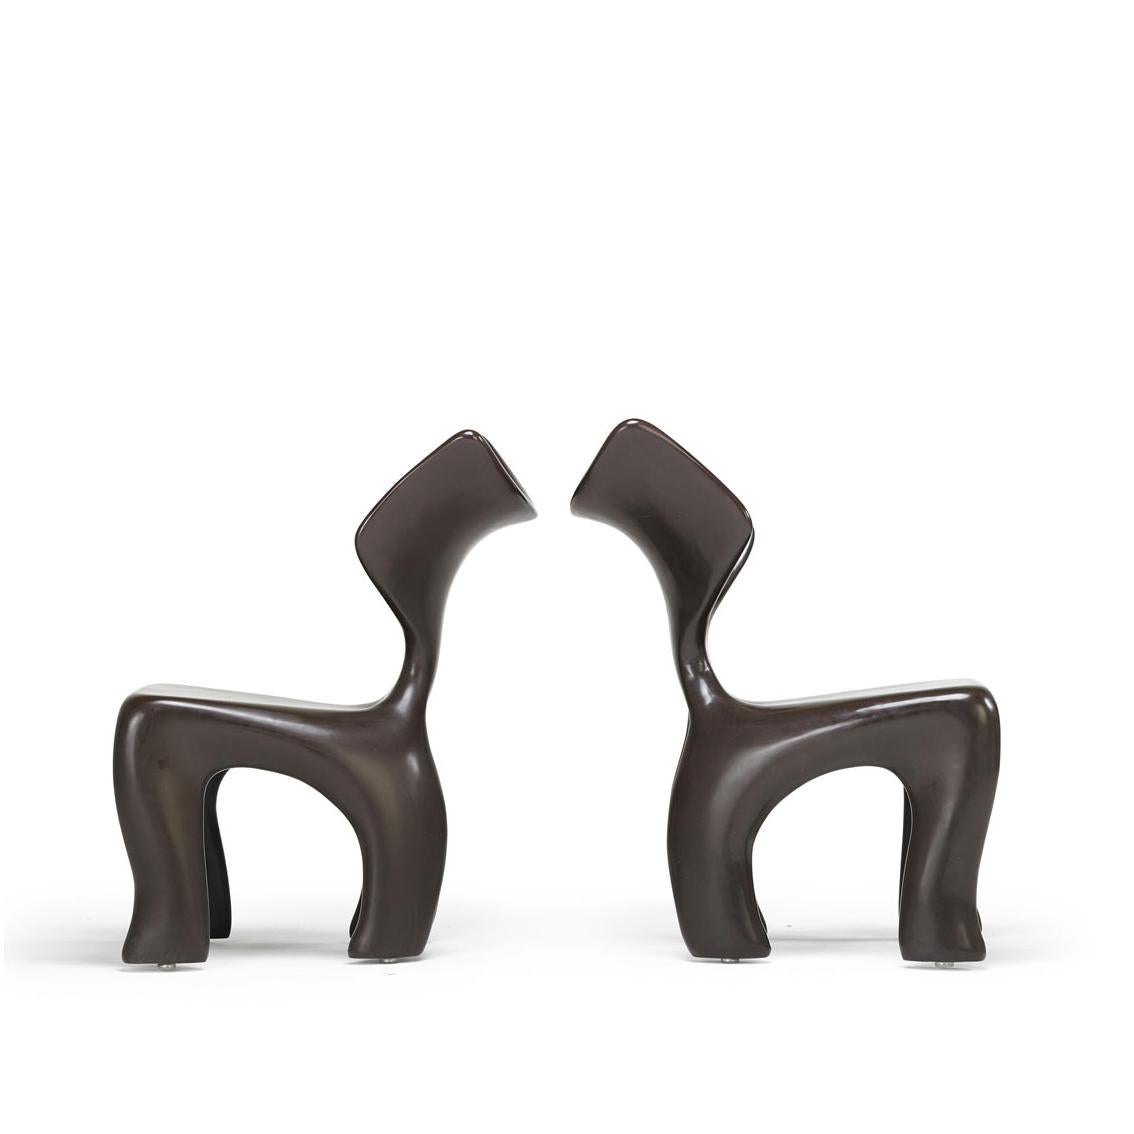 Cast East Lounge Chair, Integrally Colored Chocolate Resin, Jordan Mozer, USA, 2004 For Sale